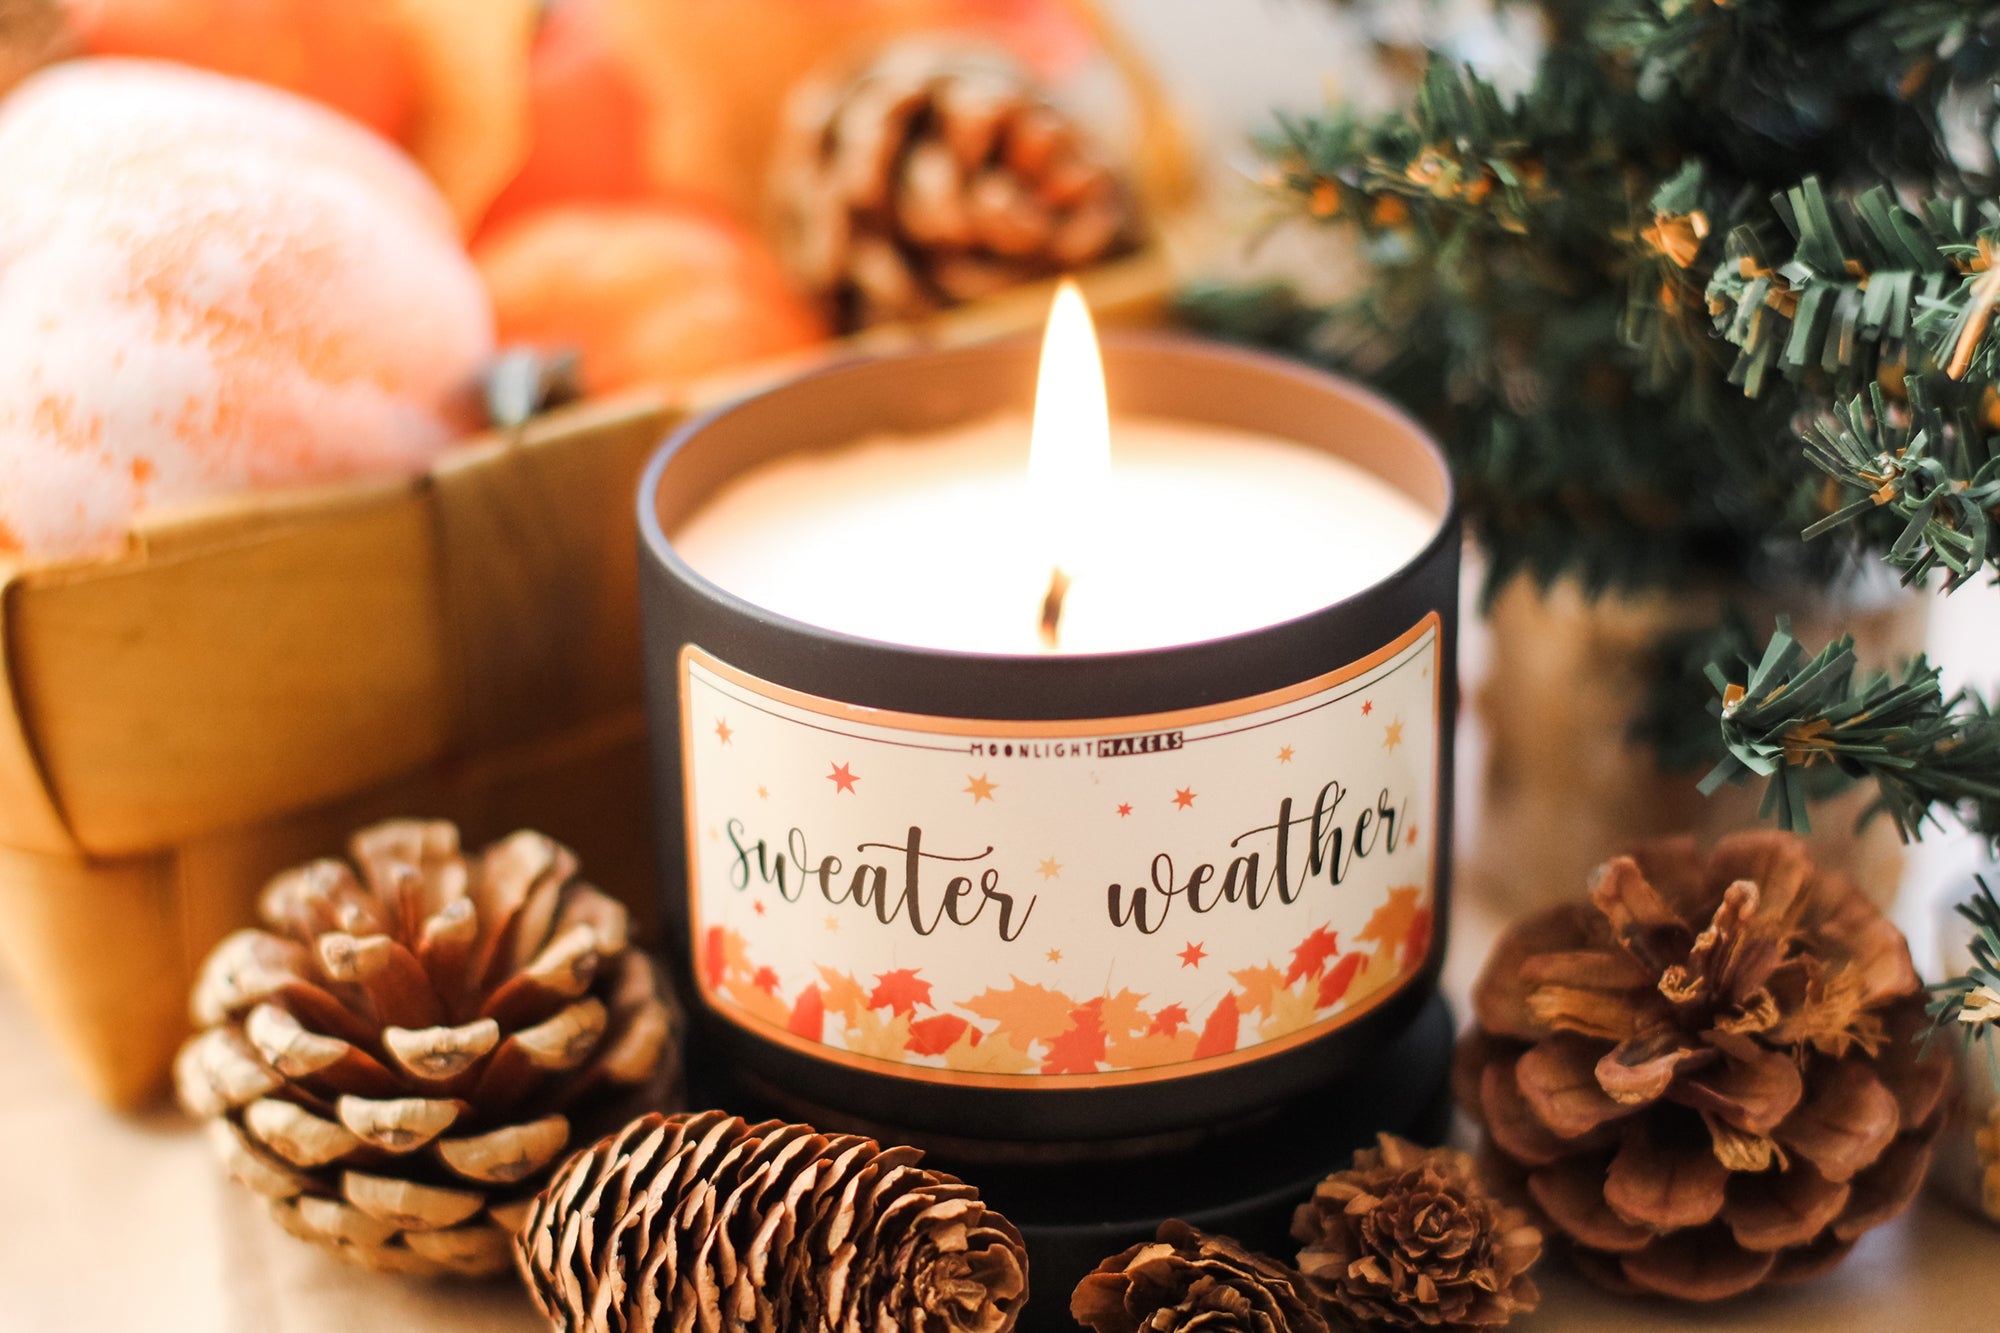 Sweater Weather - Scented Candle